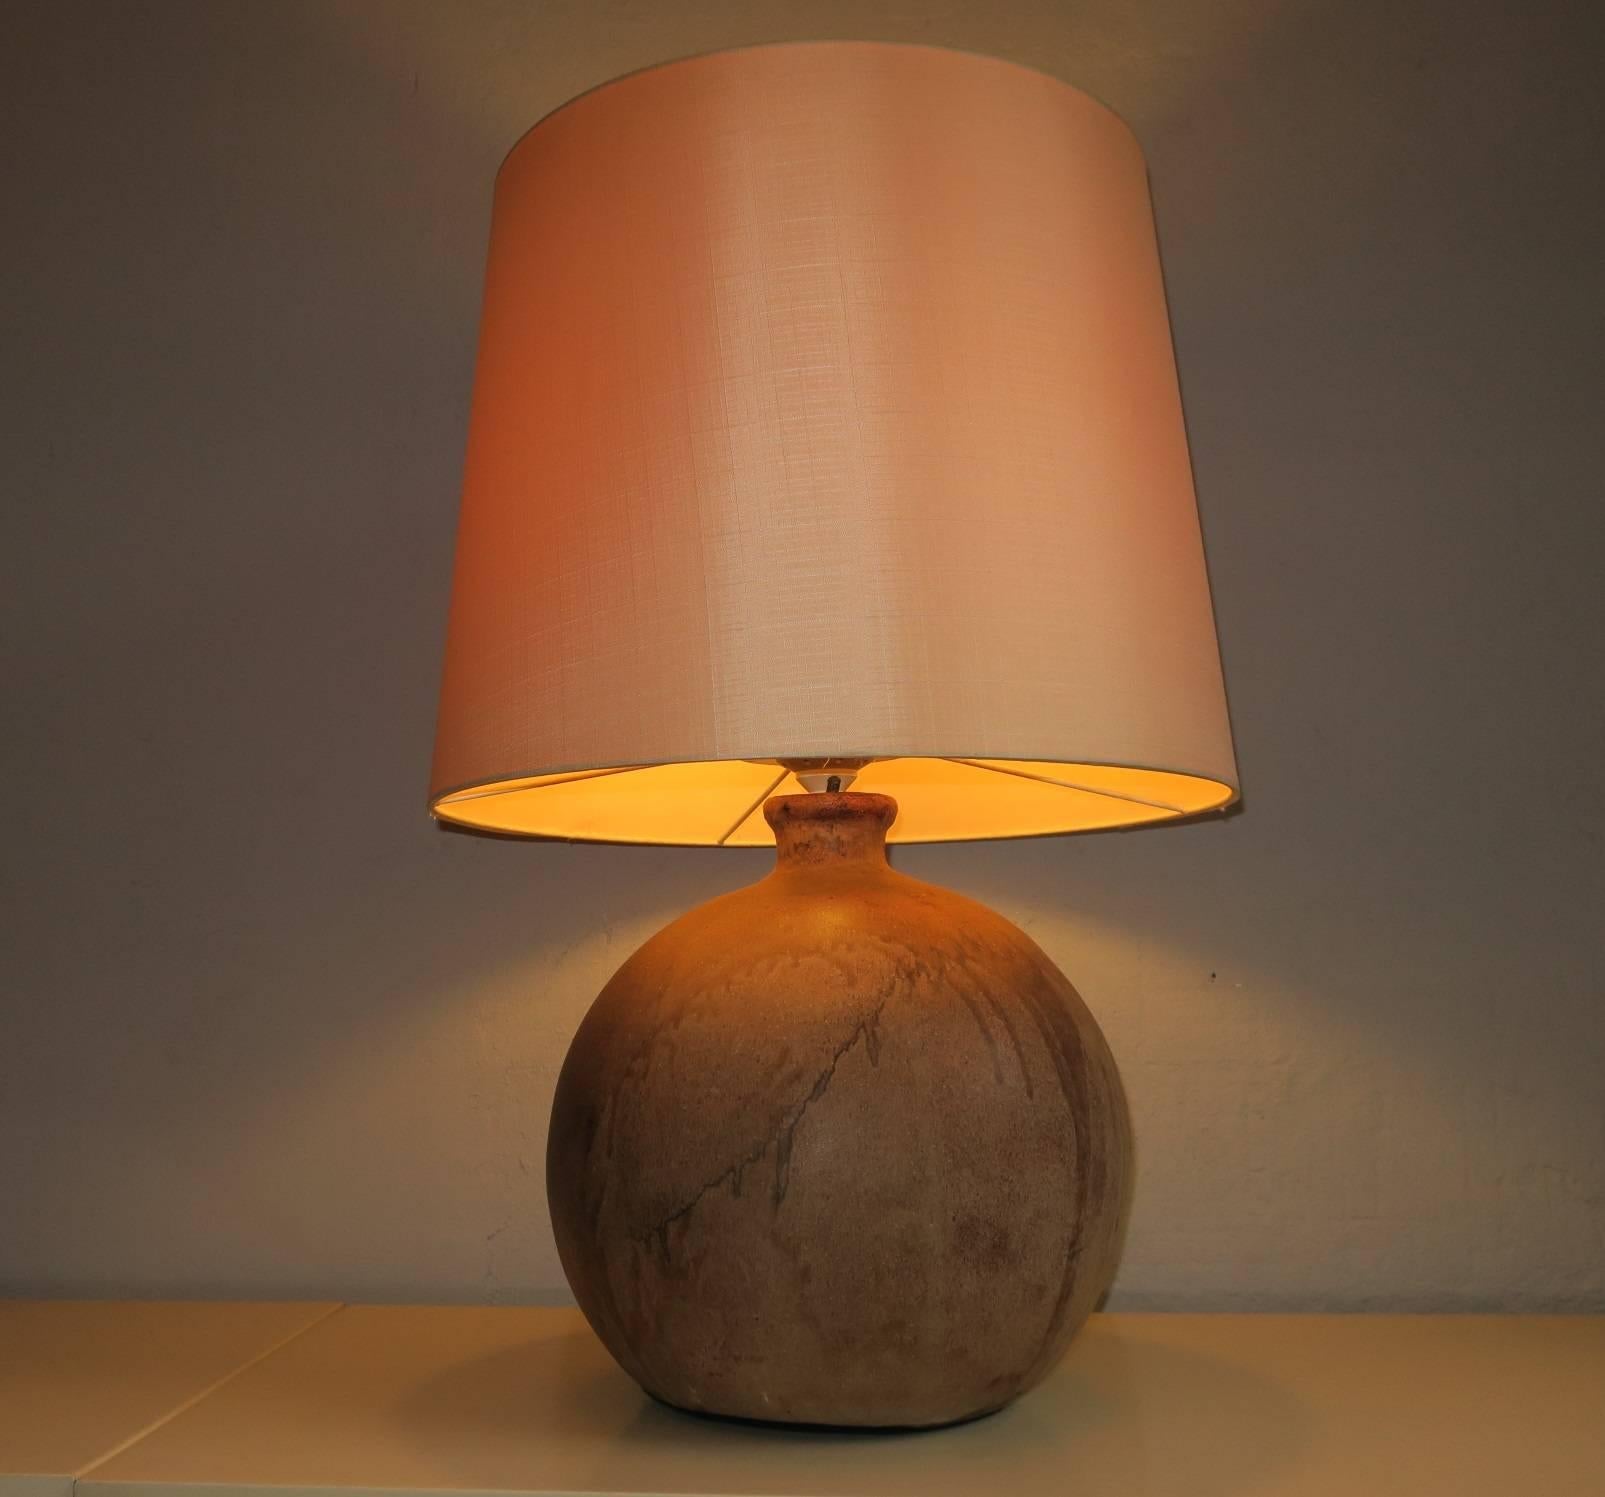 Stoneware ball table lamp, Mid-Century, with original shade, in very good vintage condition with minimal signs of age and use.